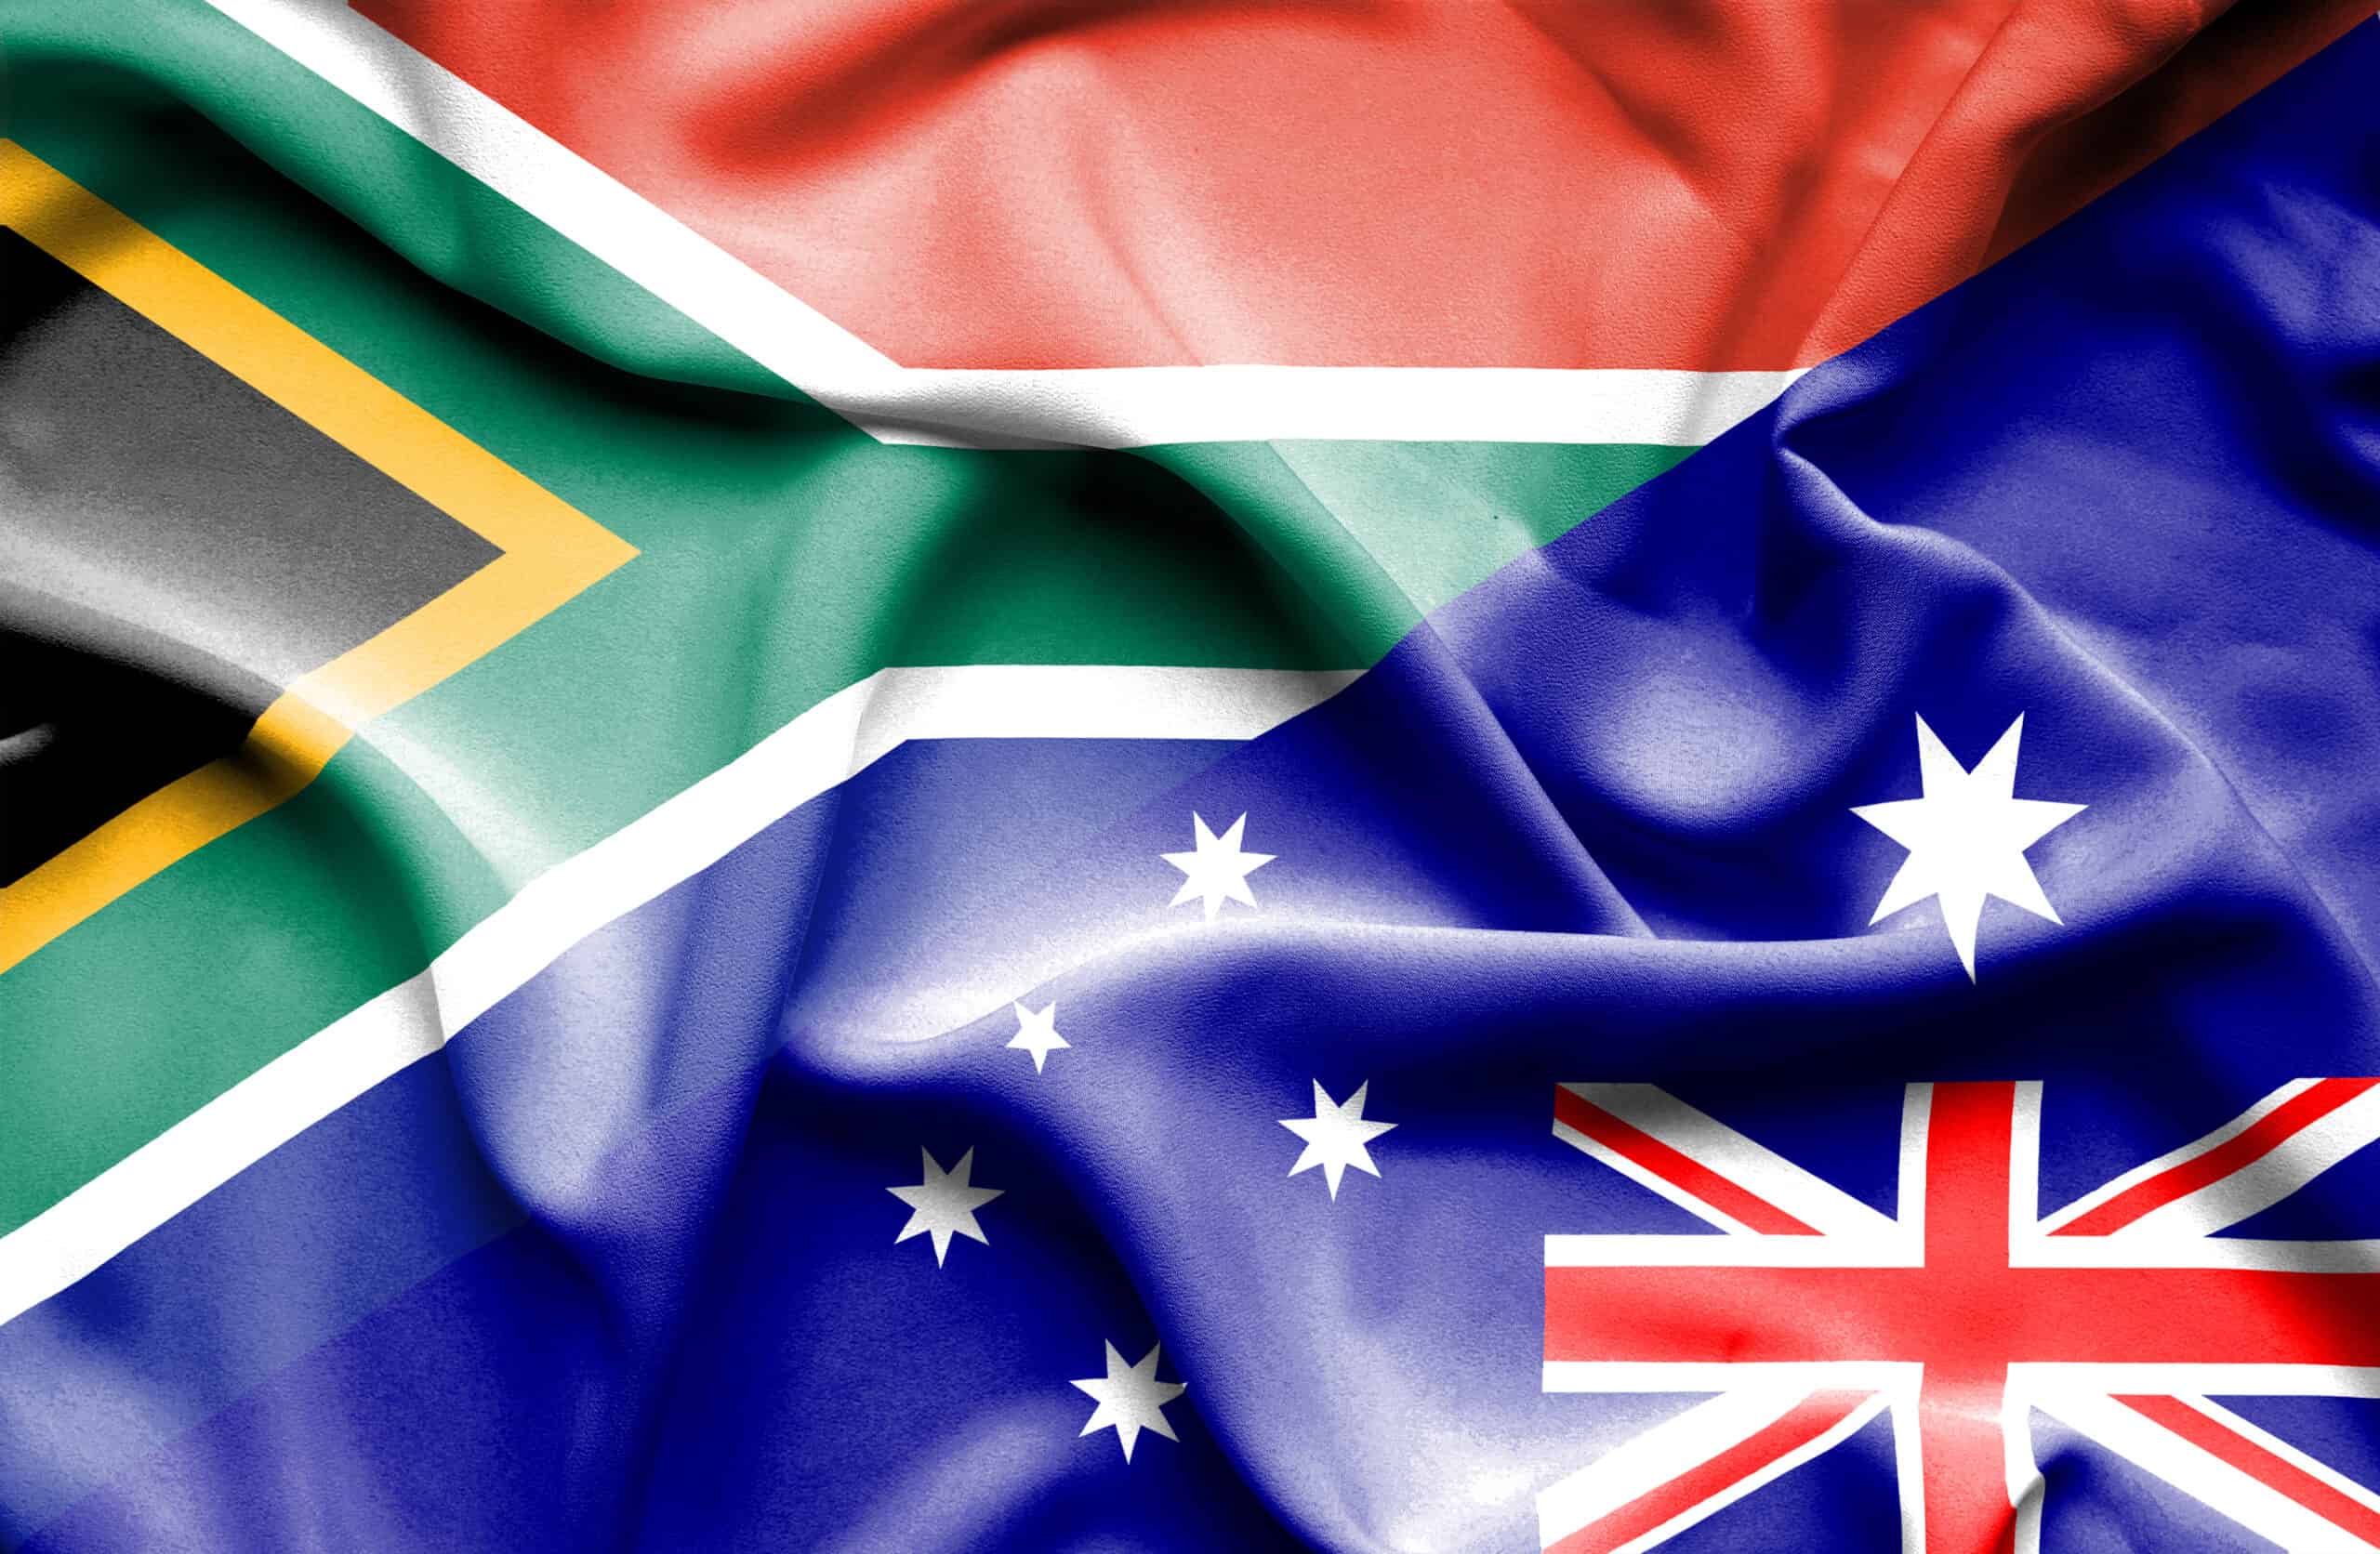 south africans and australian flag